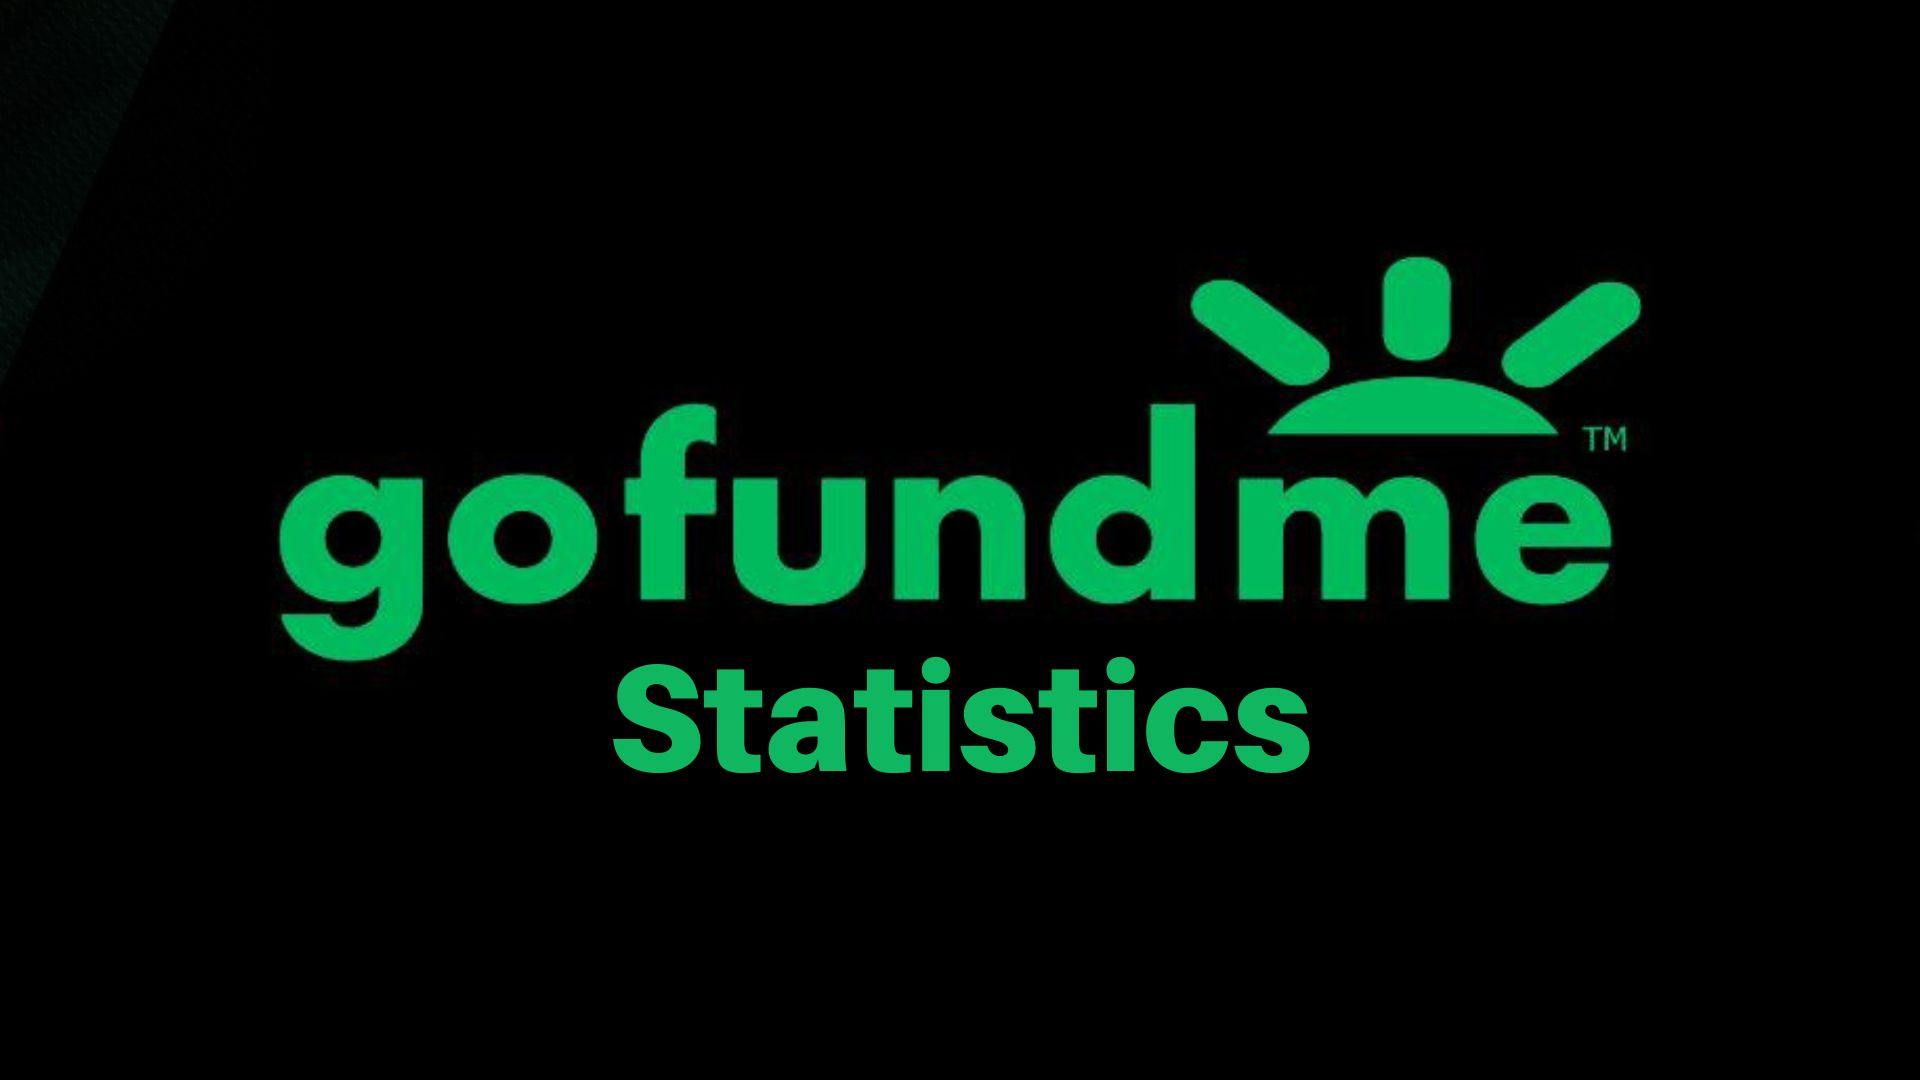 GoFundMe Statistics By Companies, Employee Size, Country, Demographic, Traffic Source, Social Media Referral Rate, Engagement and Fundraising Categories